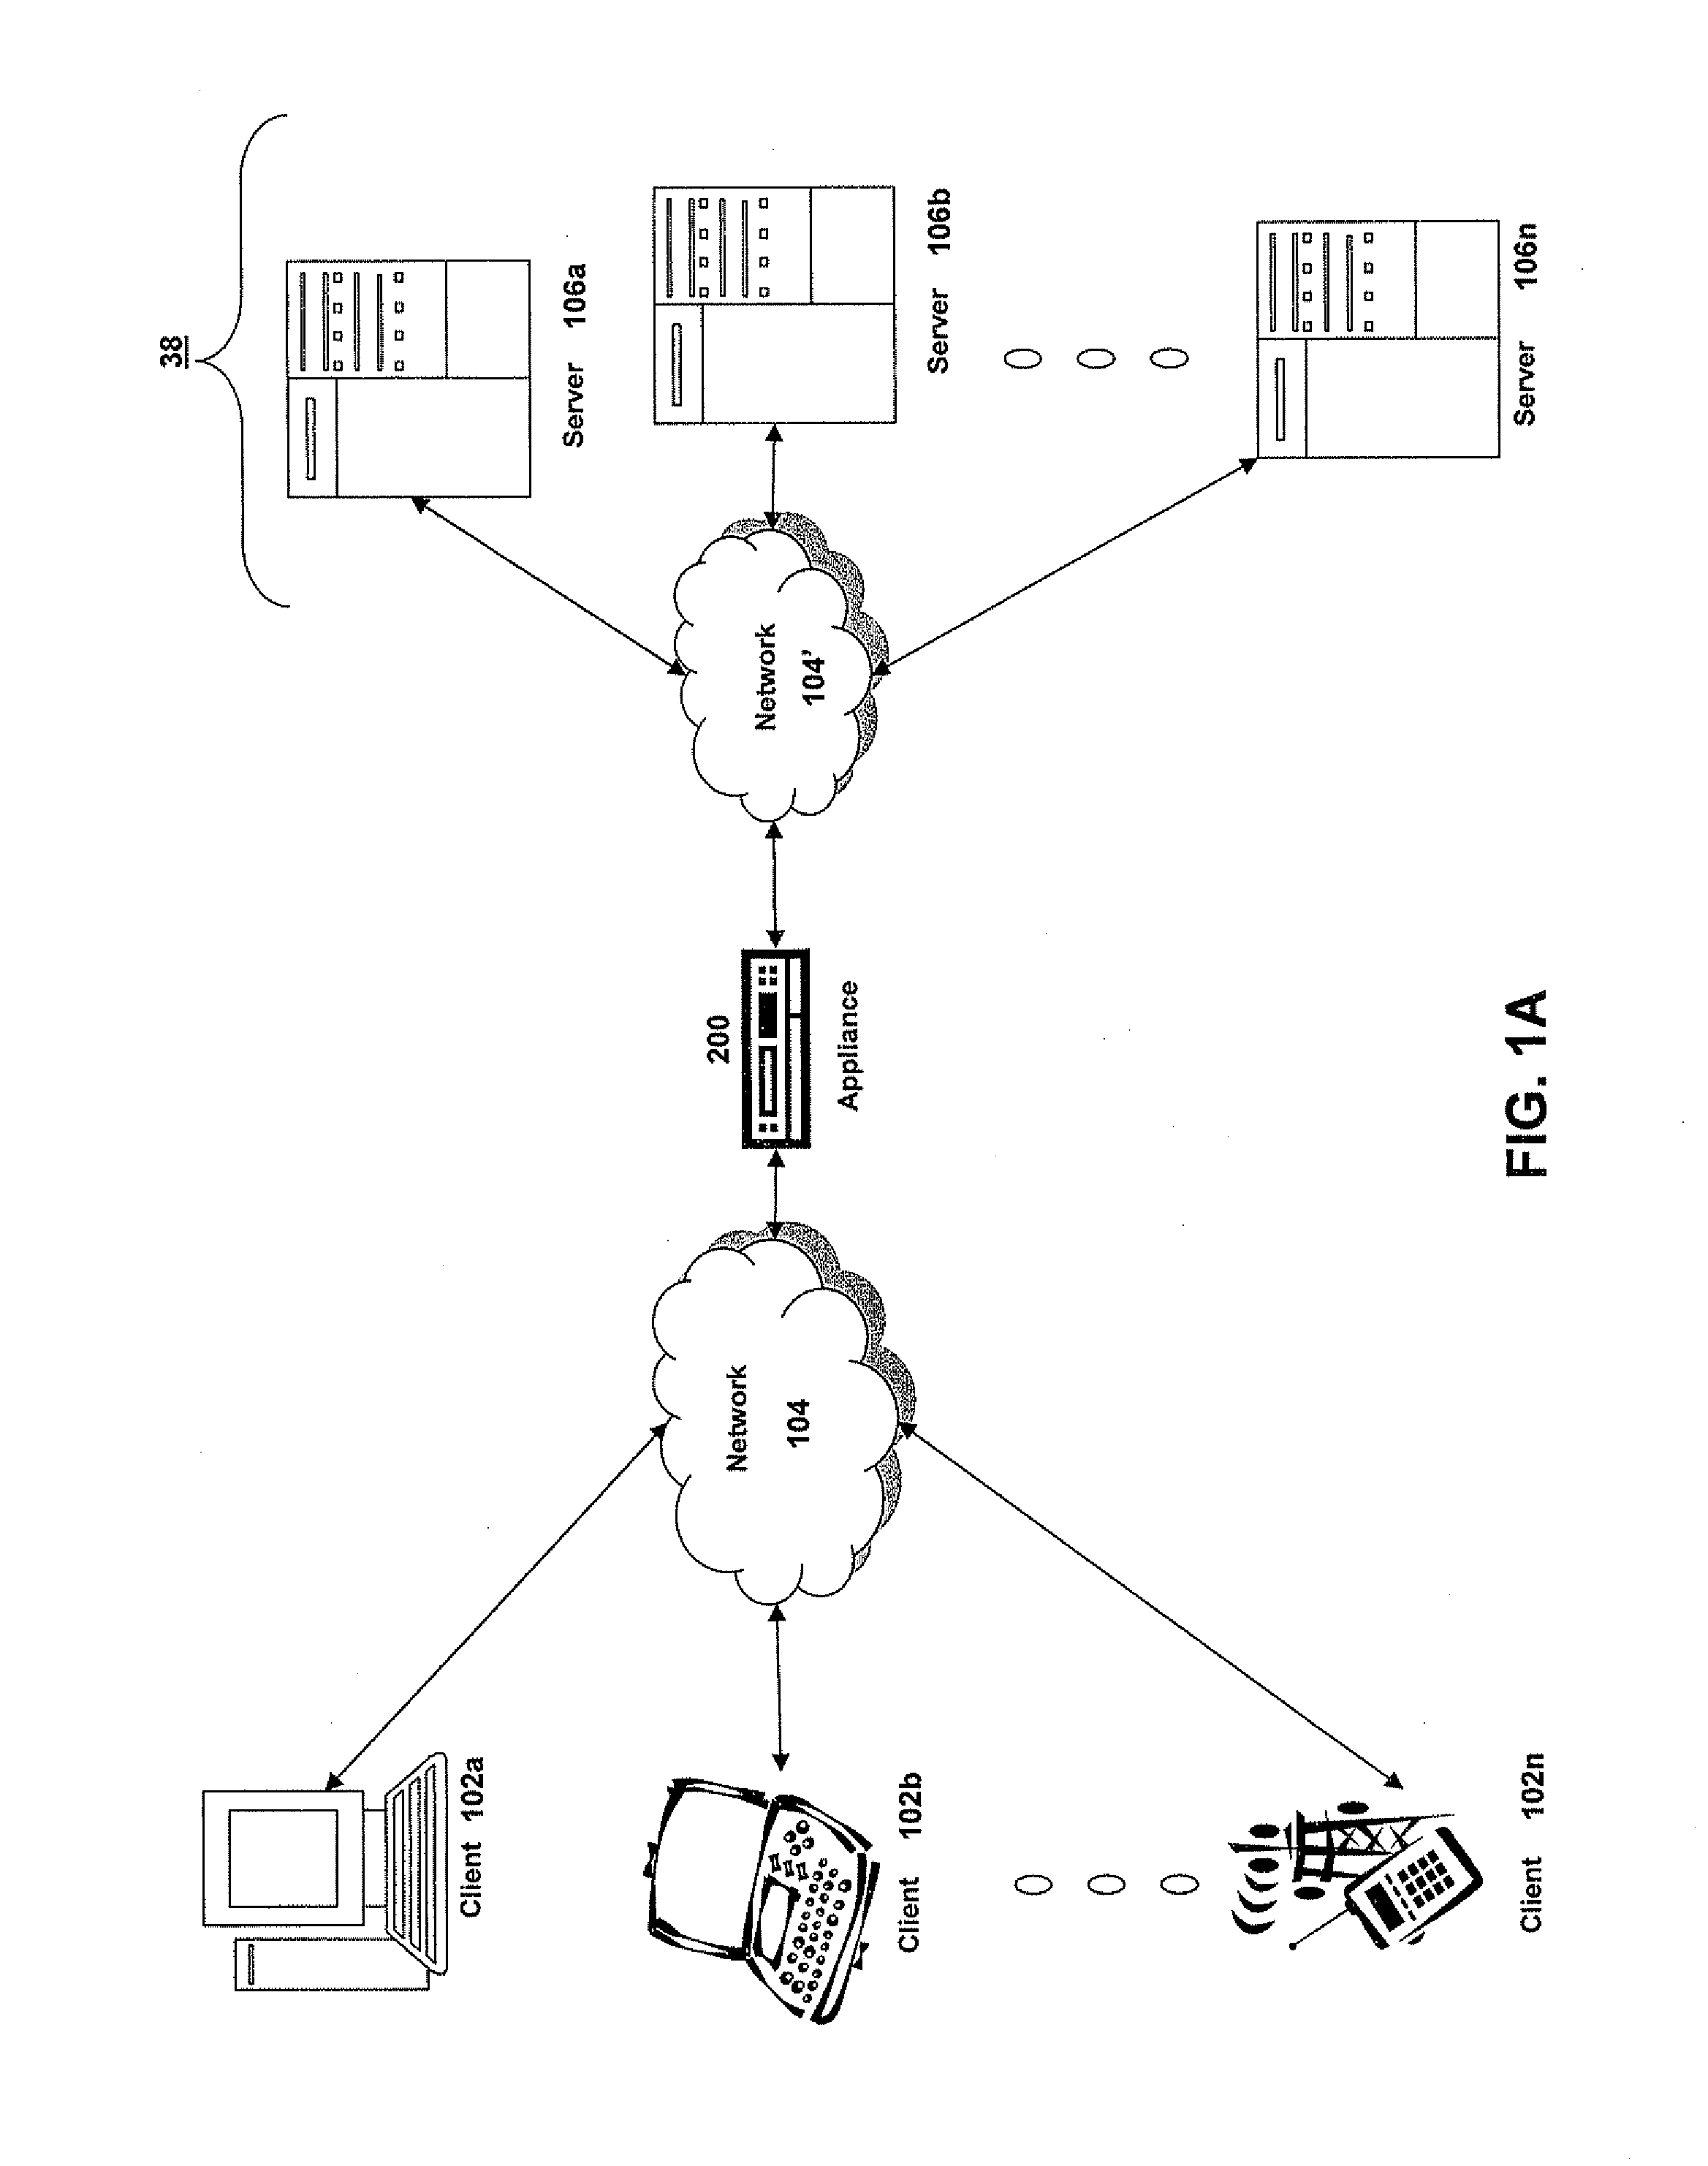 Systems and Methods for Hierarchical Global Load Balancing